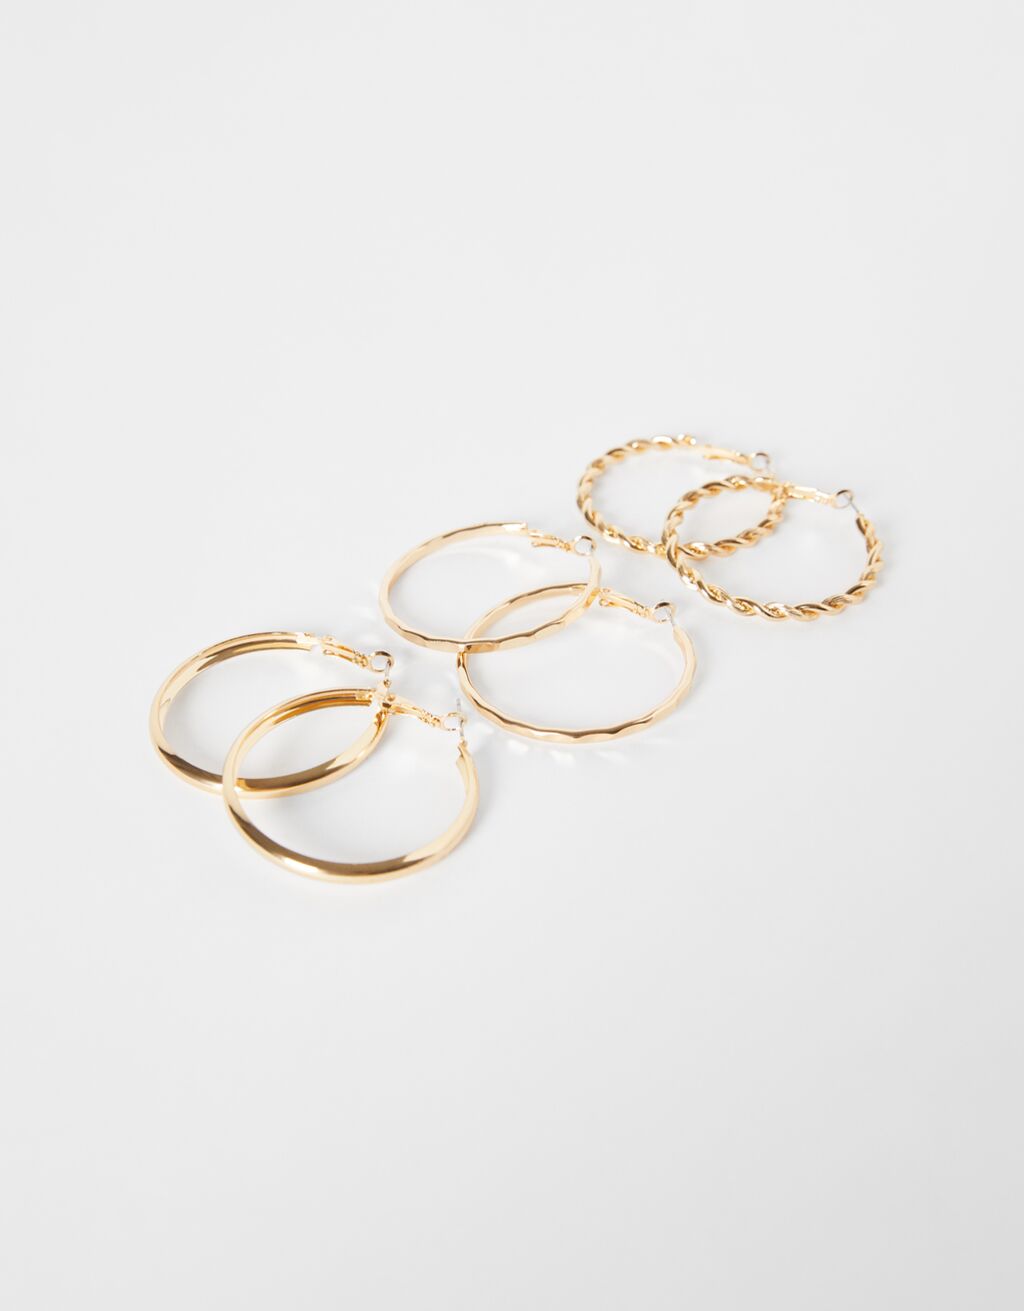 Set of 3 pairs of textured thin ring earrings